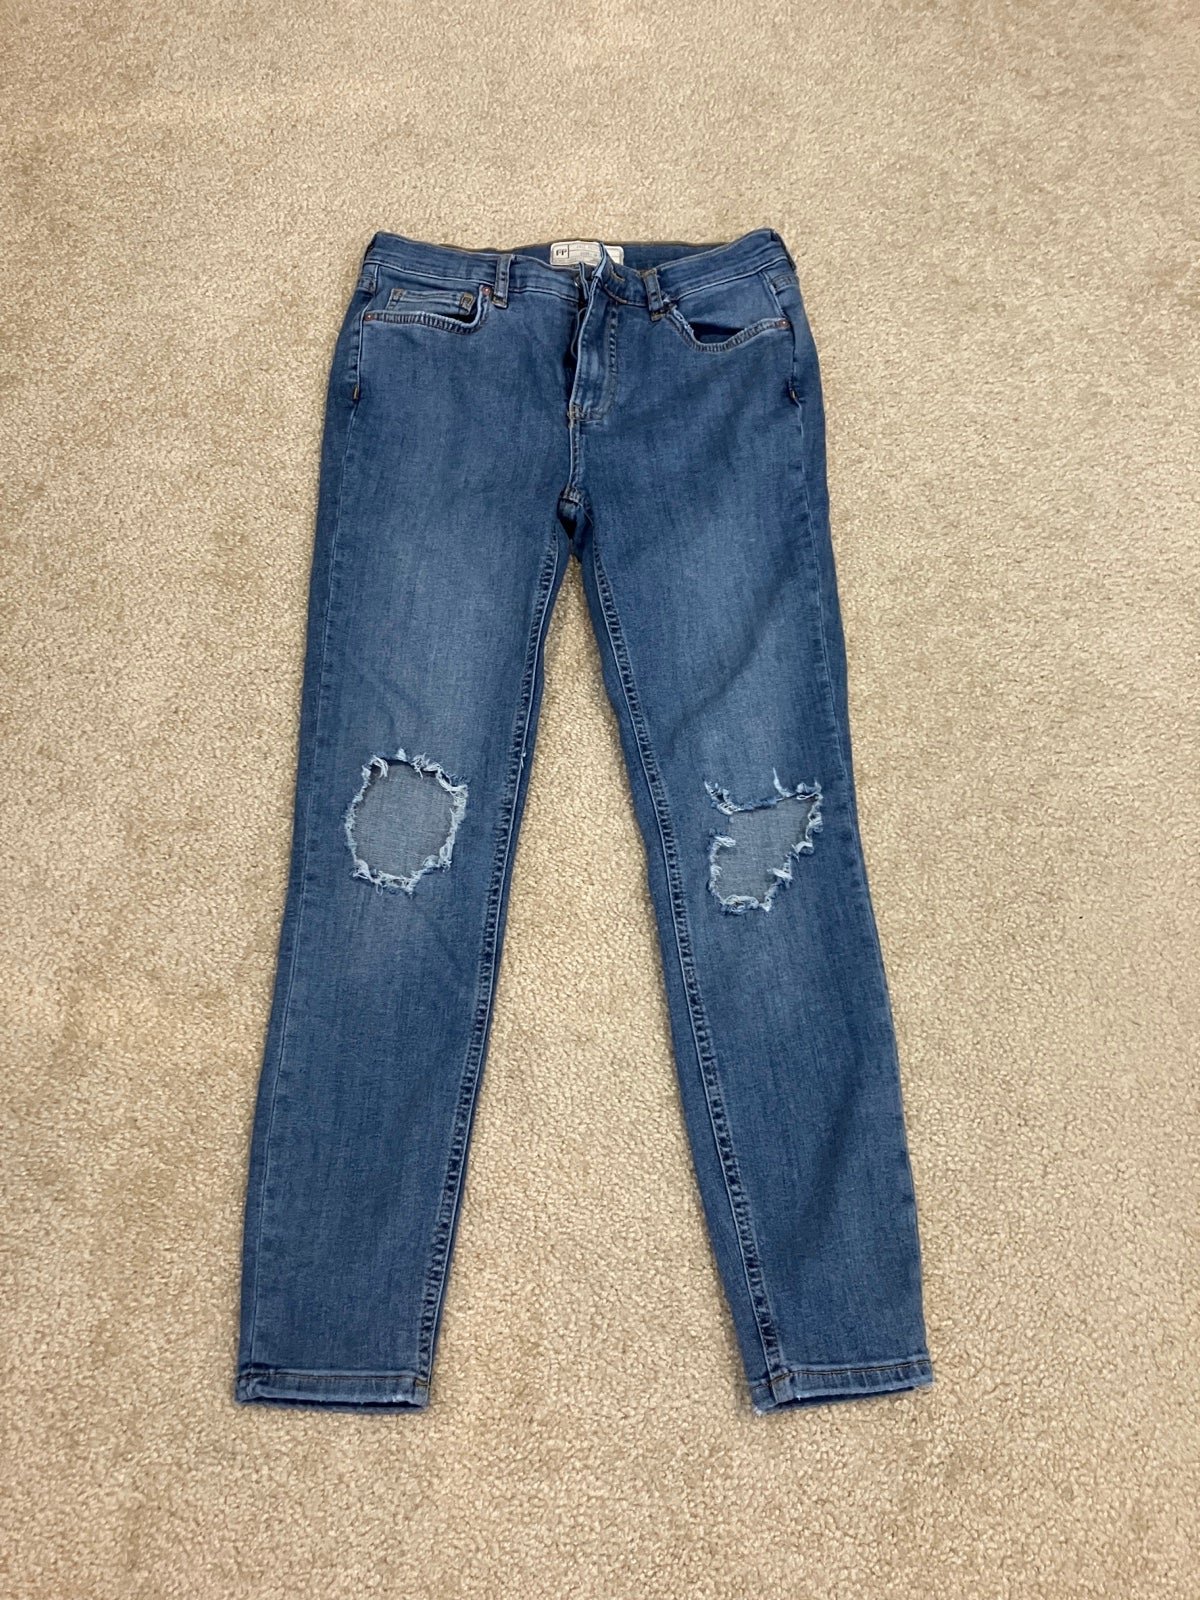 Discounted Free People Womens Jeans sz 27R MC6wP14JY Outlet Store